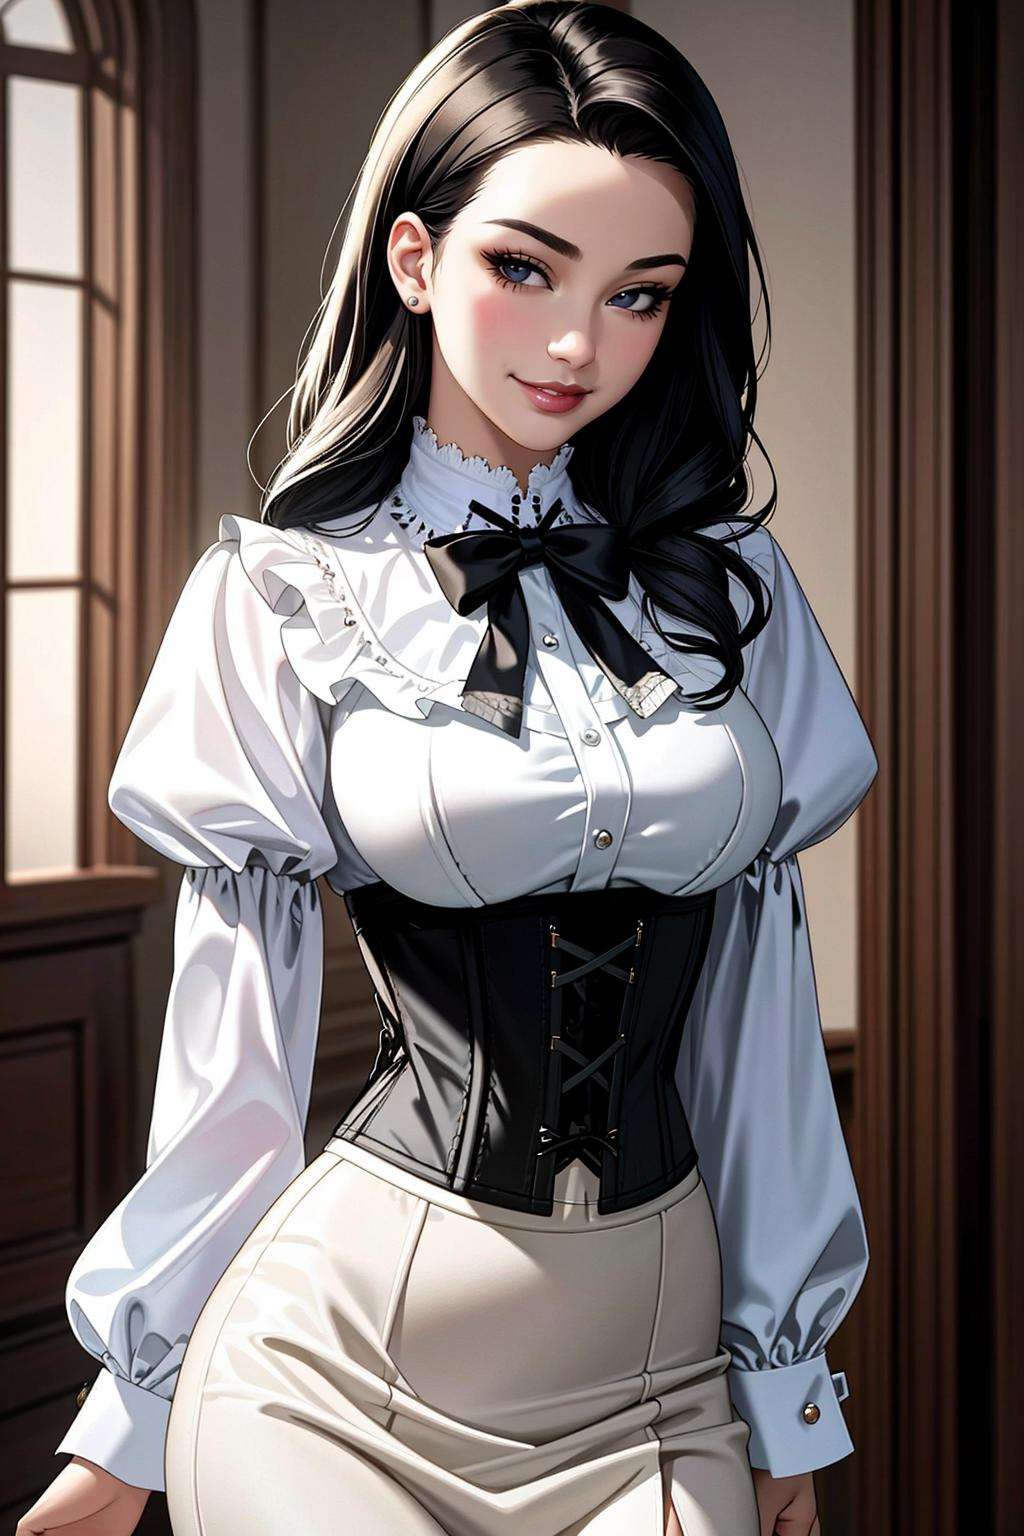 ((Masterpiece, best quality)),edgQuality,smirk,smug, looking at vieweredgCT, a woman in a blouse, and a skirt,wearing edgCT,chic top,(corset)<lora:edgChicTops1:0.85>